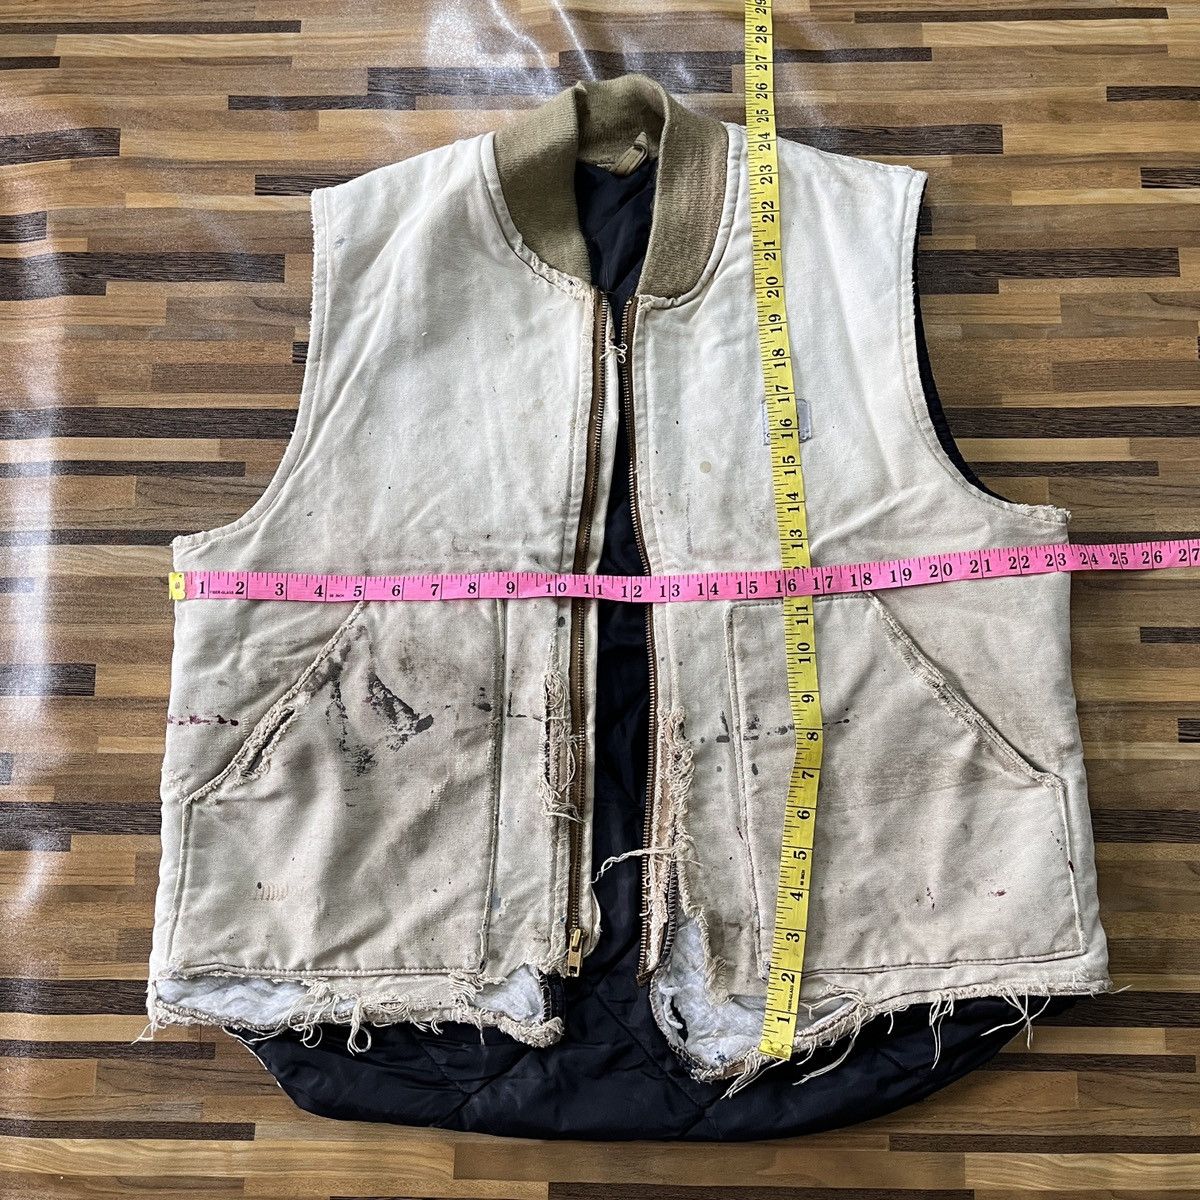 Distressed Vintage Carhartt Worker Vest Ripped Made In USA - 4